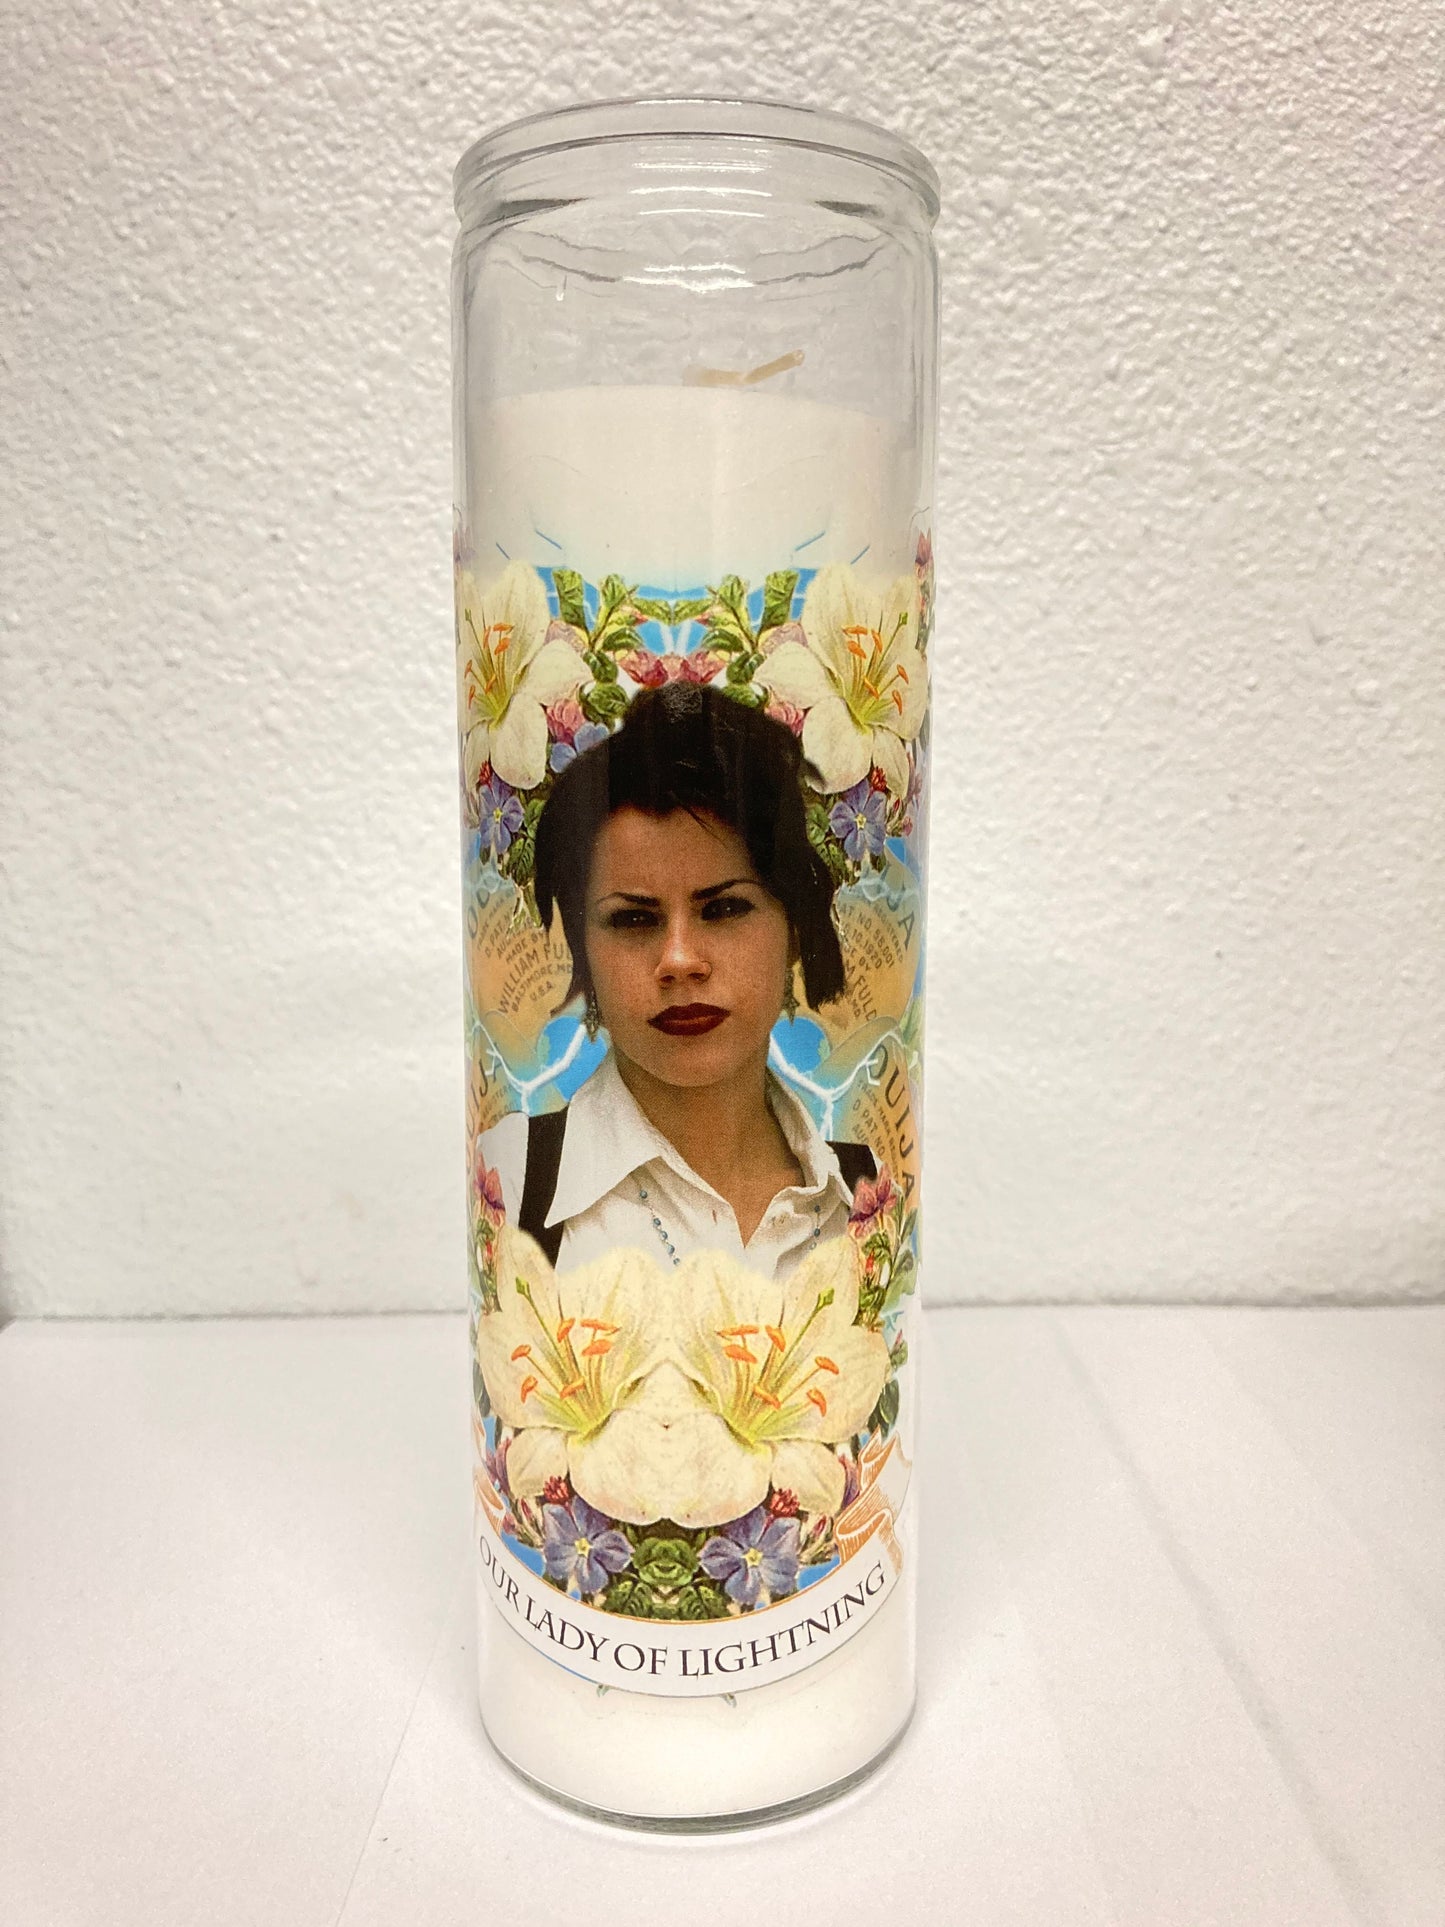 The Craft Candle